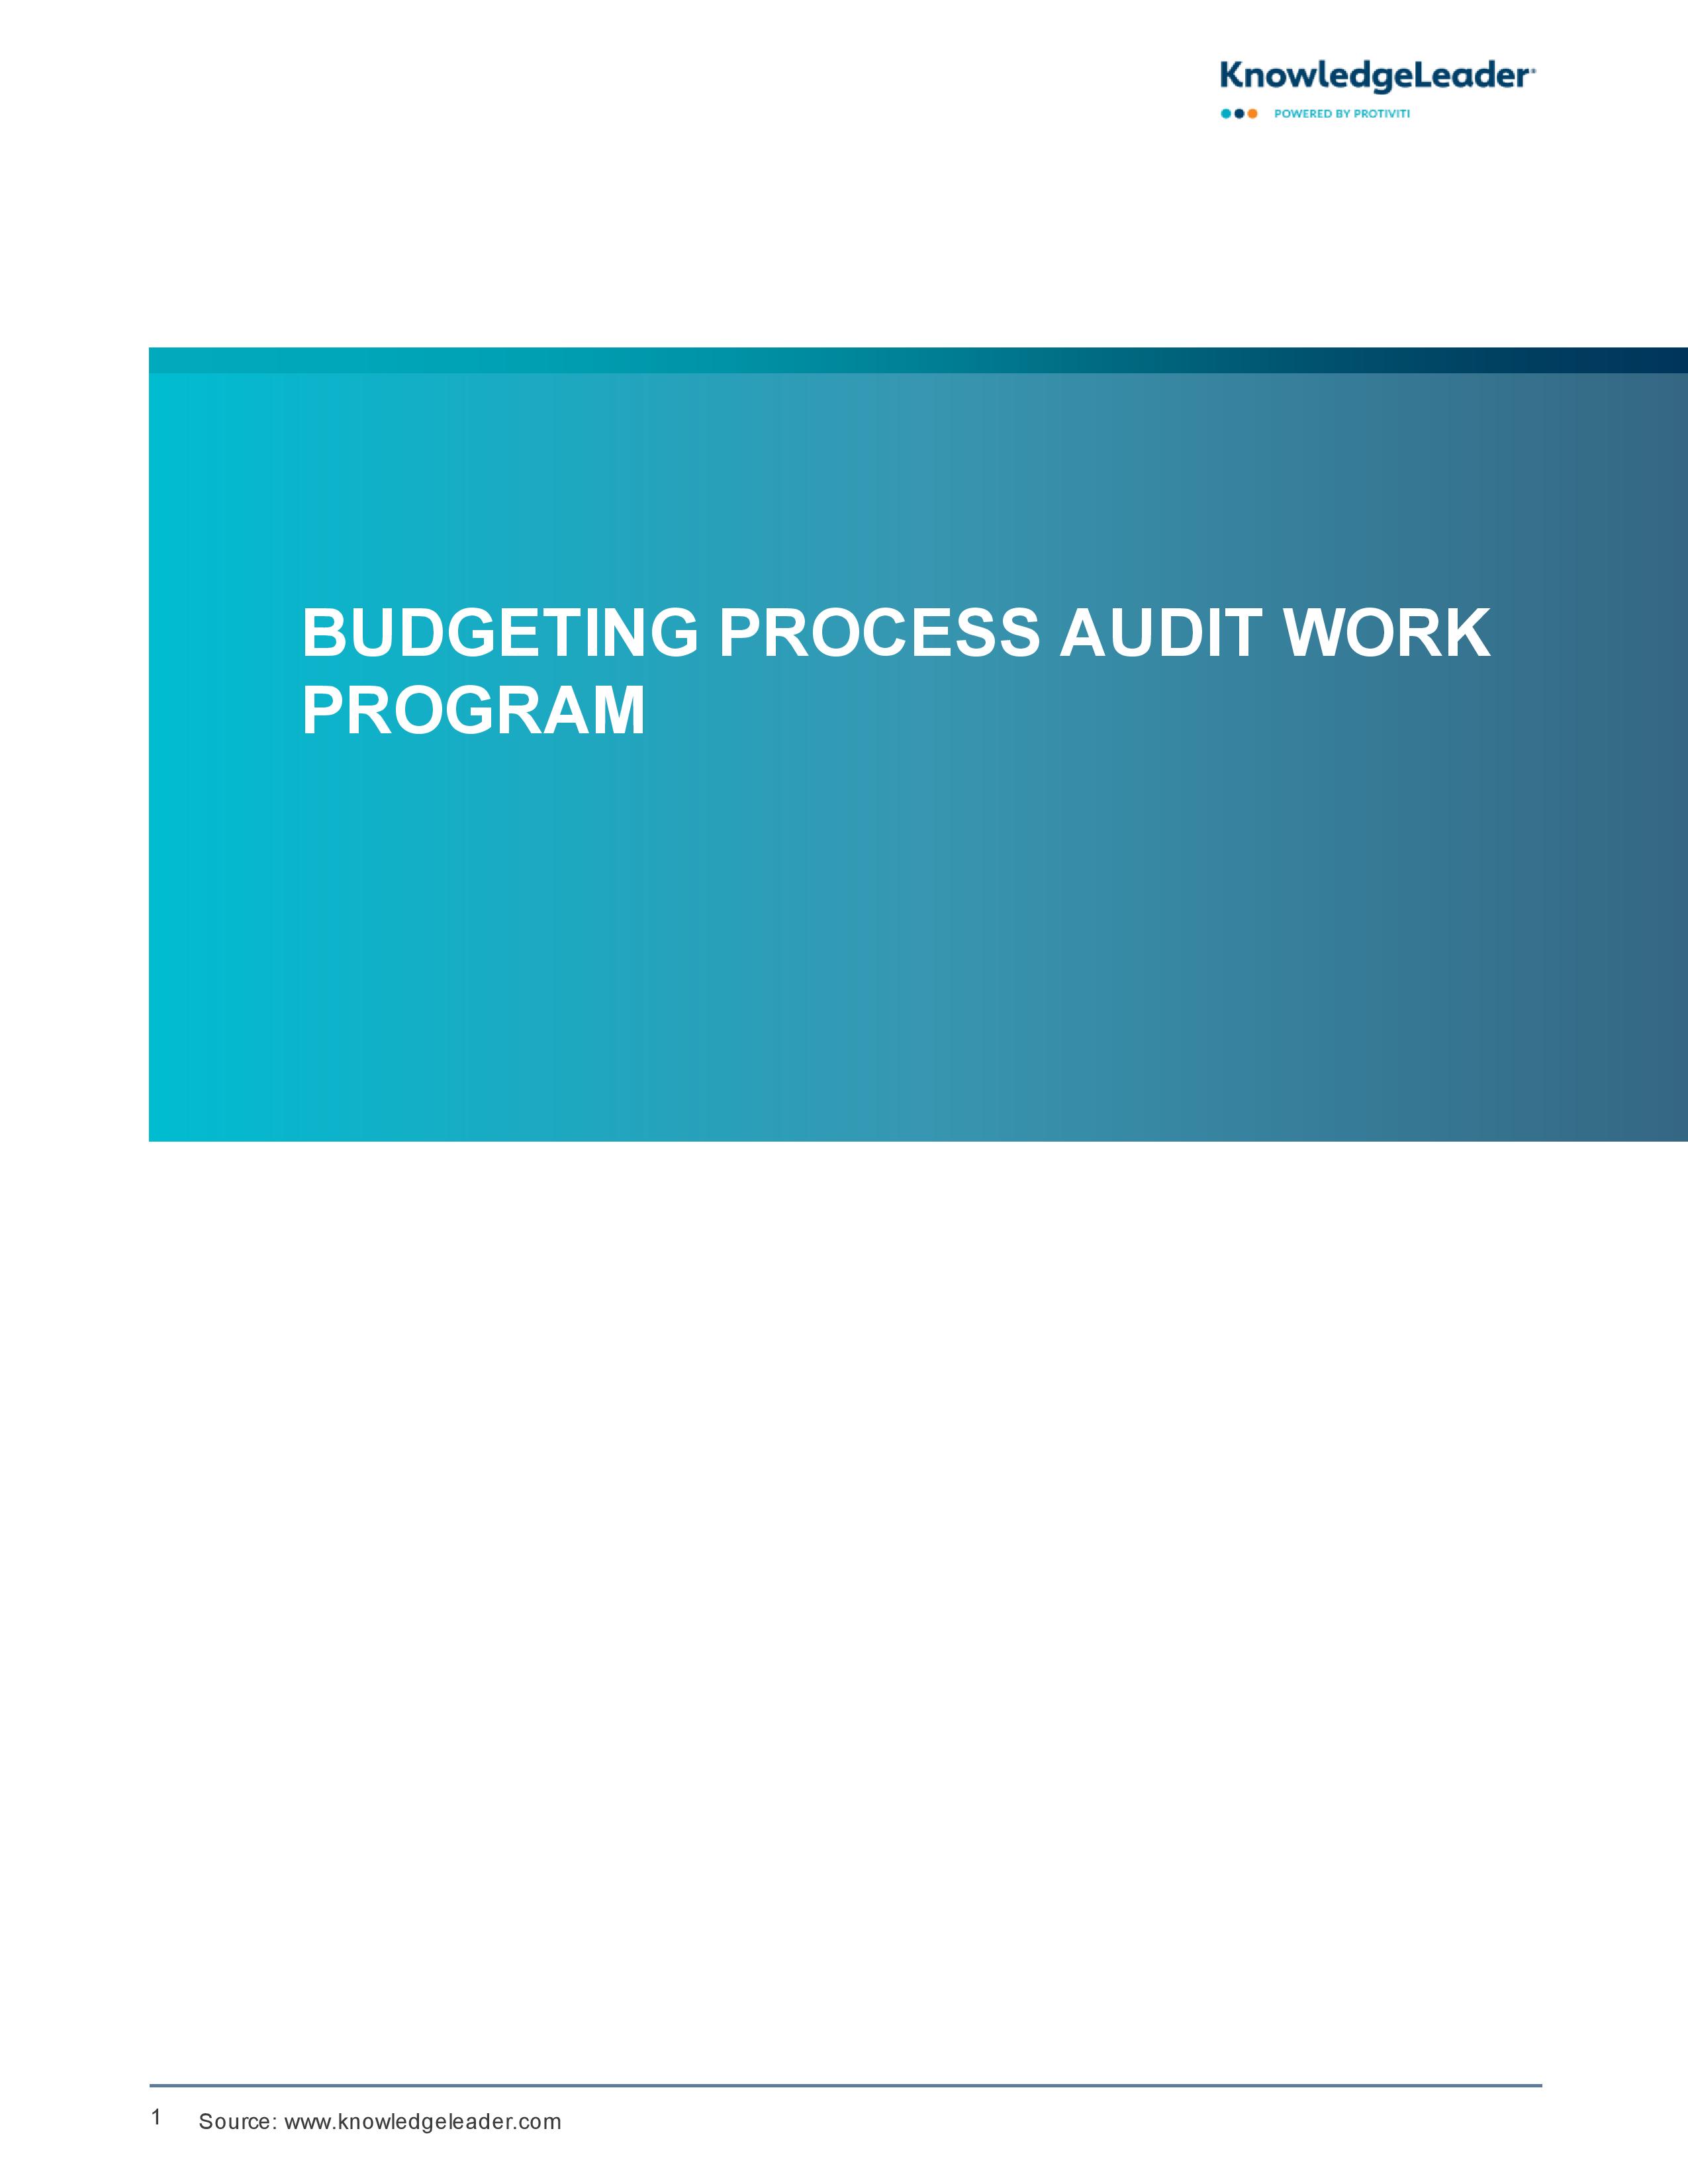 Screenshot of the first page of Budgeting Process Audit Work Program